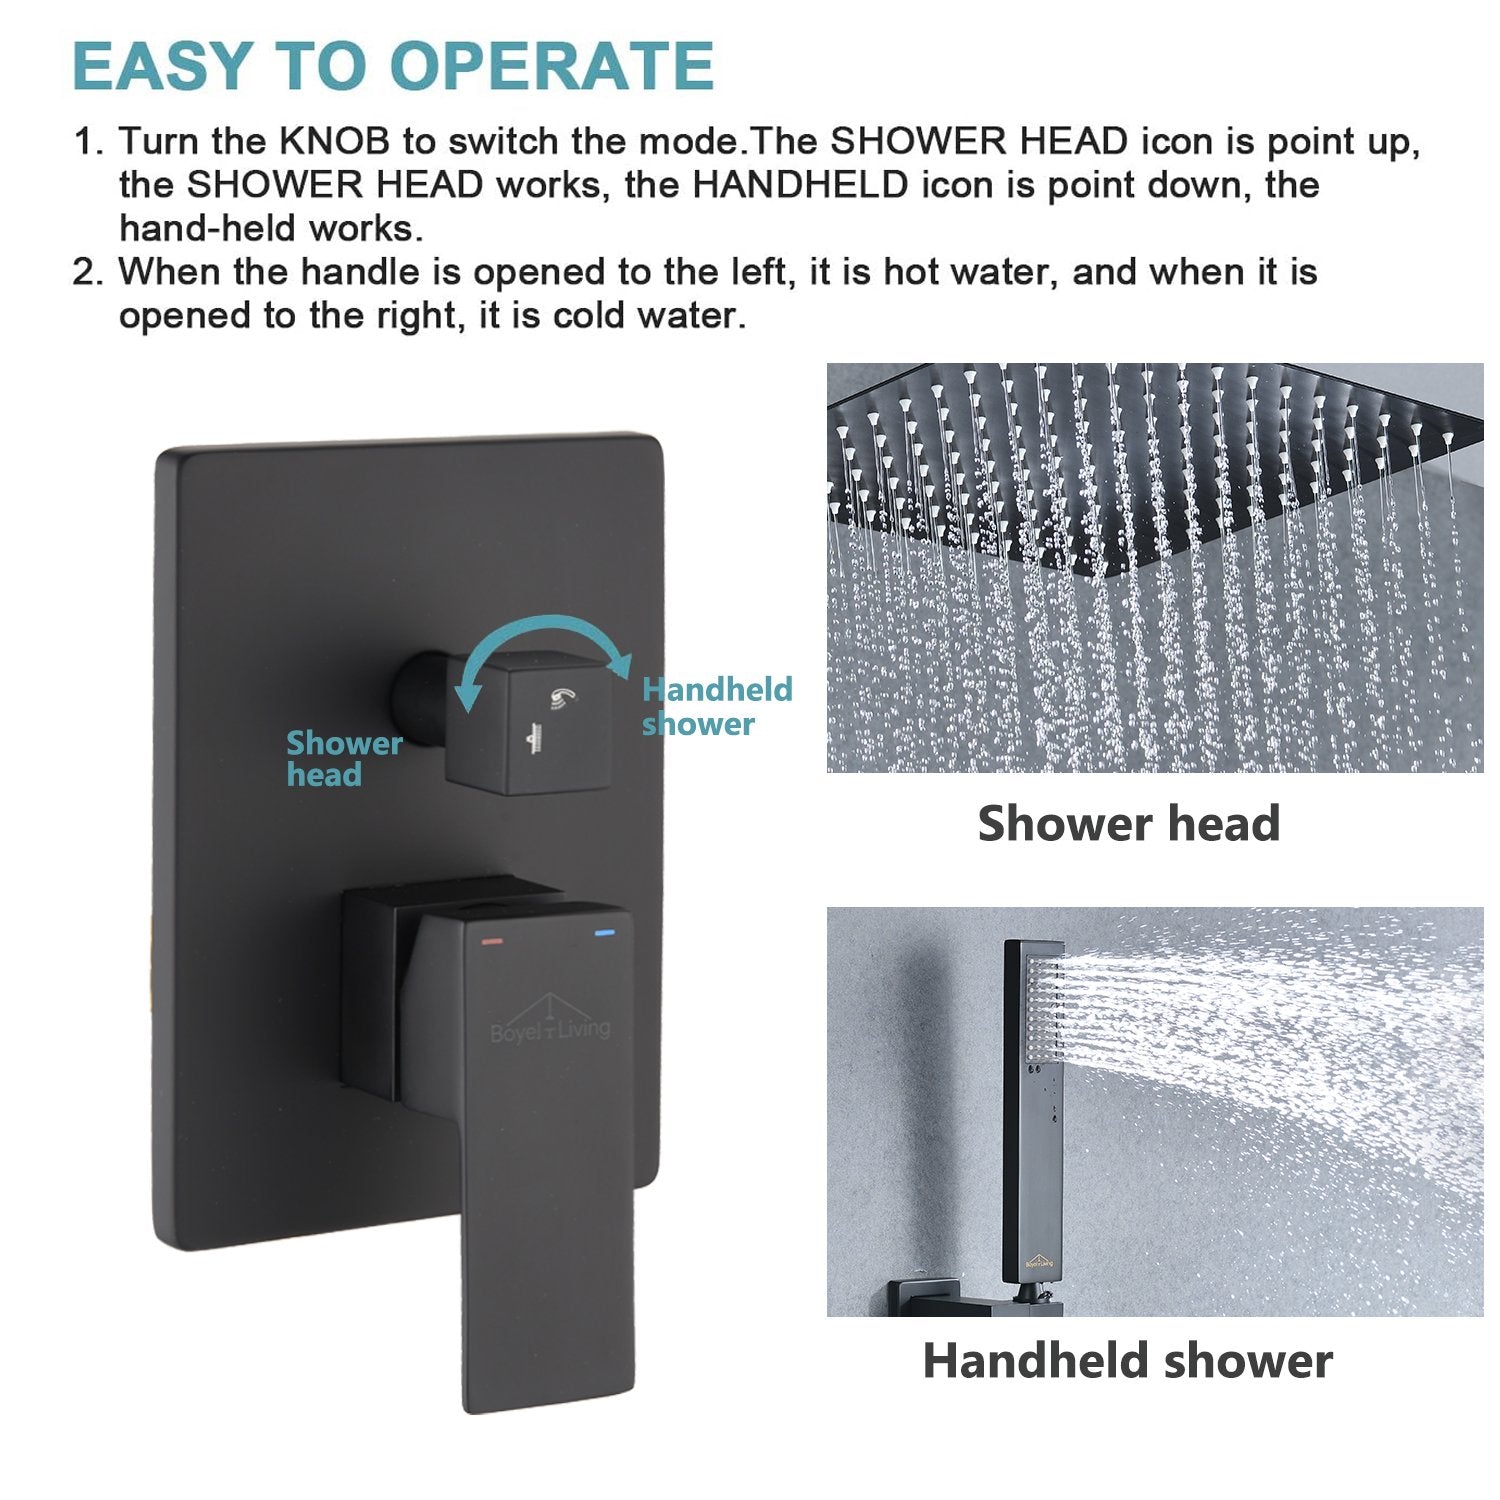 Shower System Wall Mounted with 10 in. Square Rainfall Shower head and Handheld Shower Head Set, Matte Black - Alipuinc